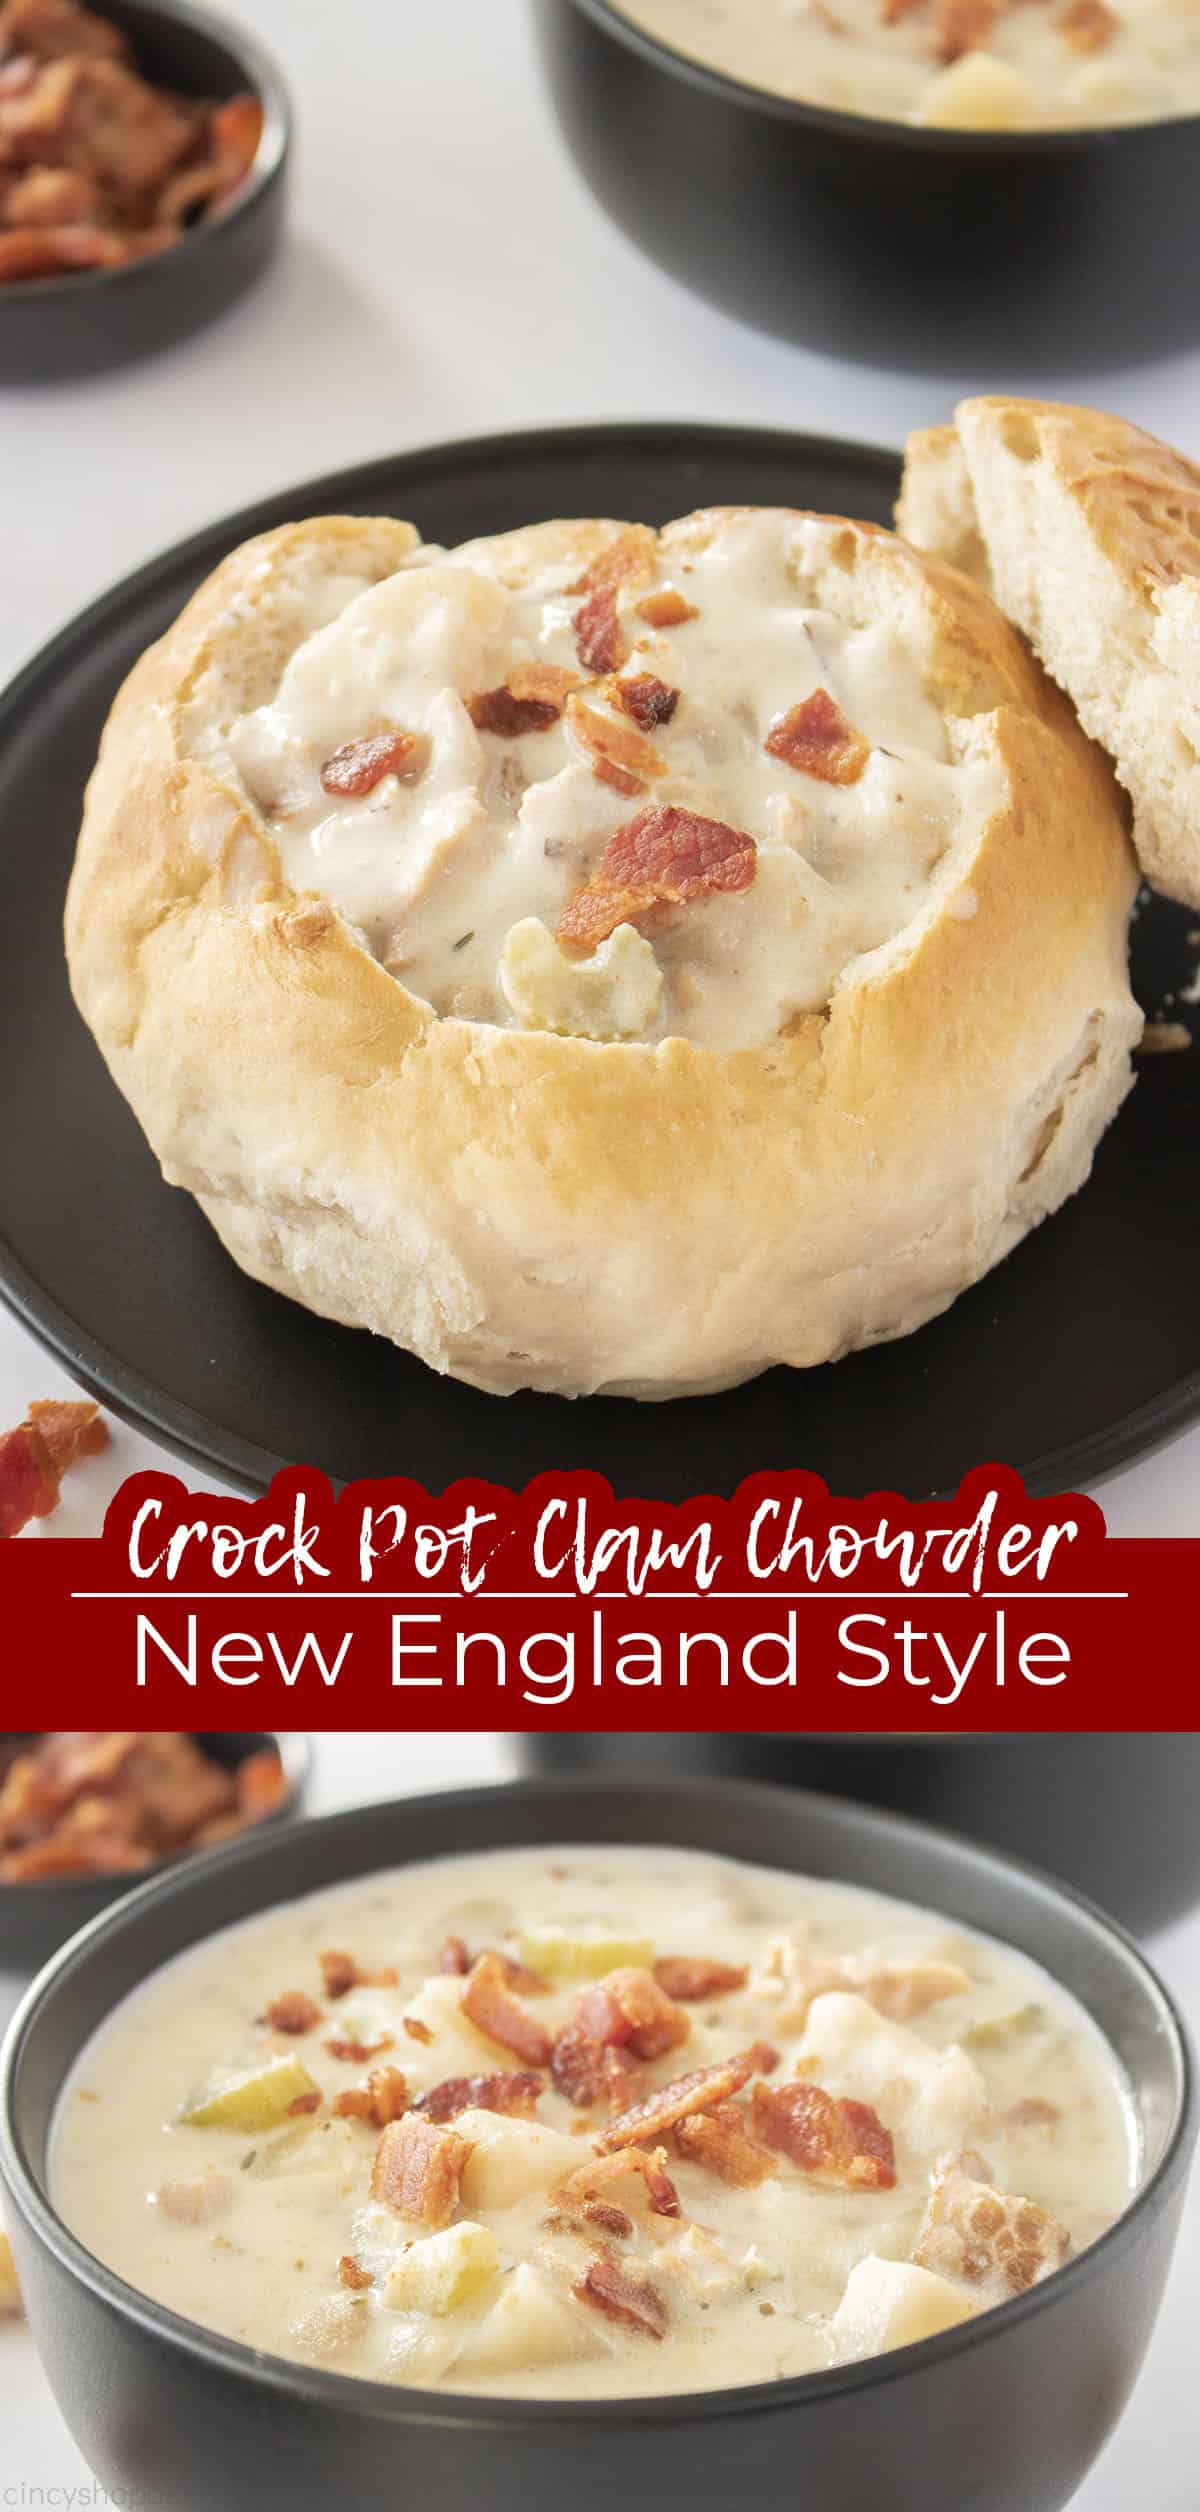 Text on image Crock Pot Clam Chowder New England Style.